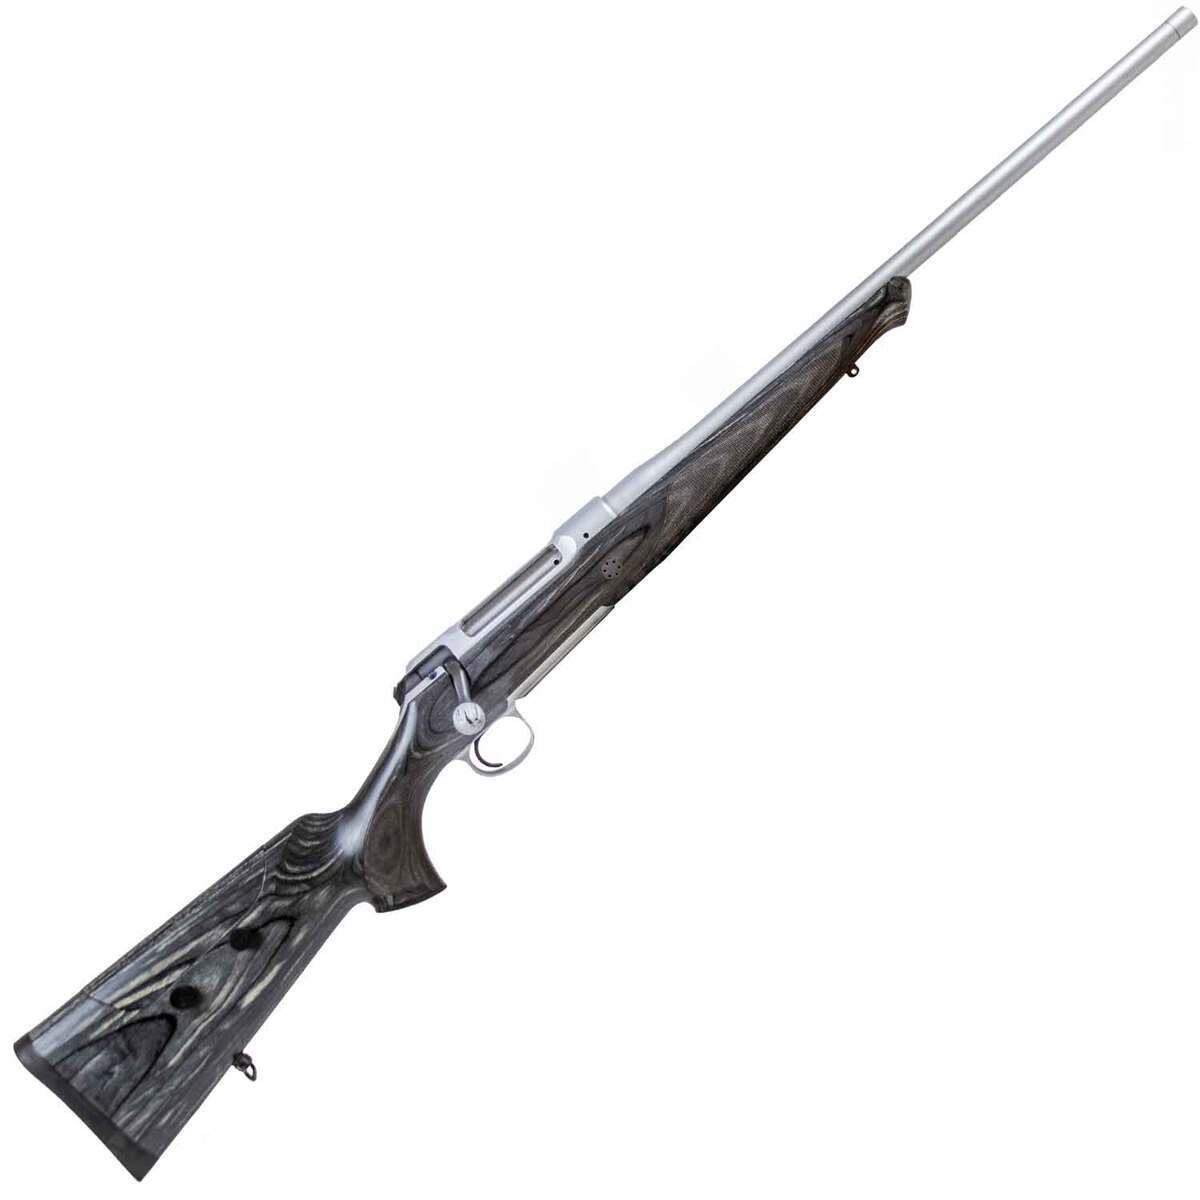 Sauer 101 Bolt Action Rifle - 30-06 Springfield - 21in - Used ...